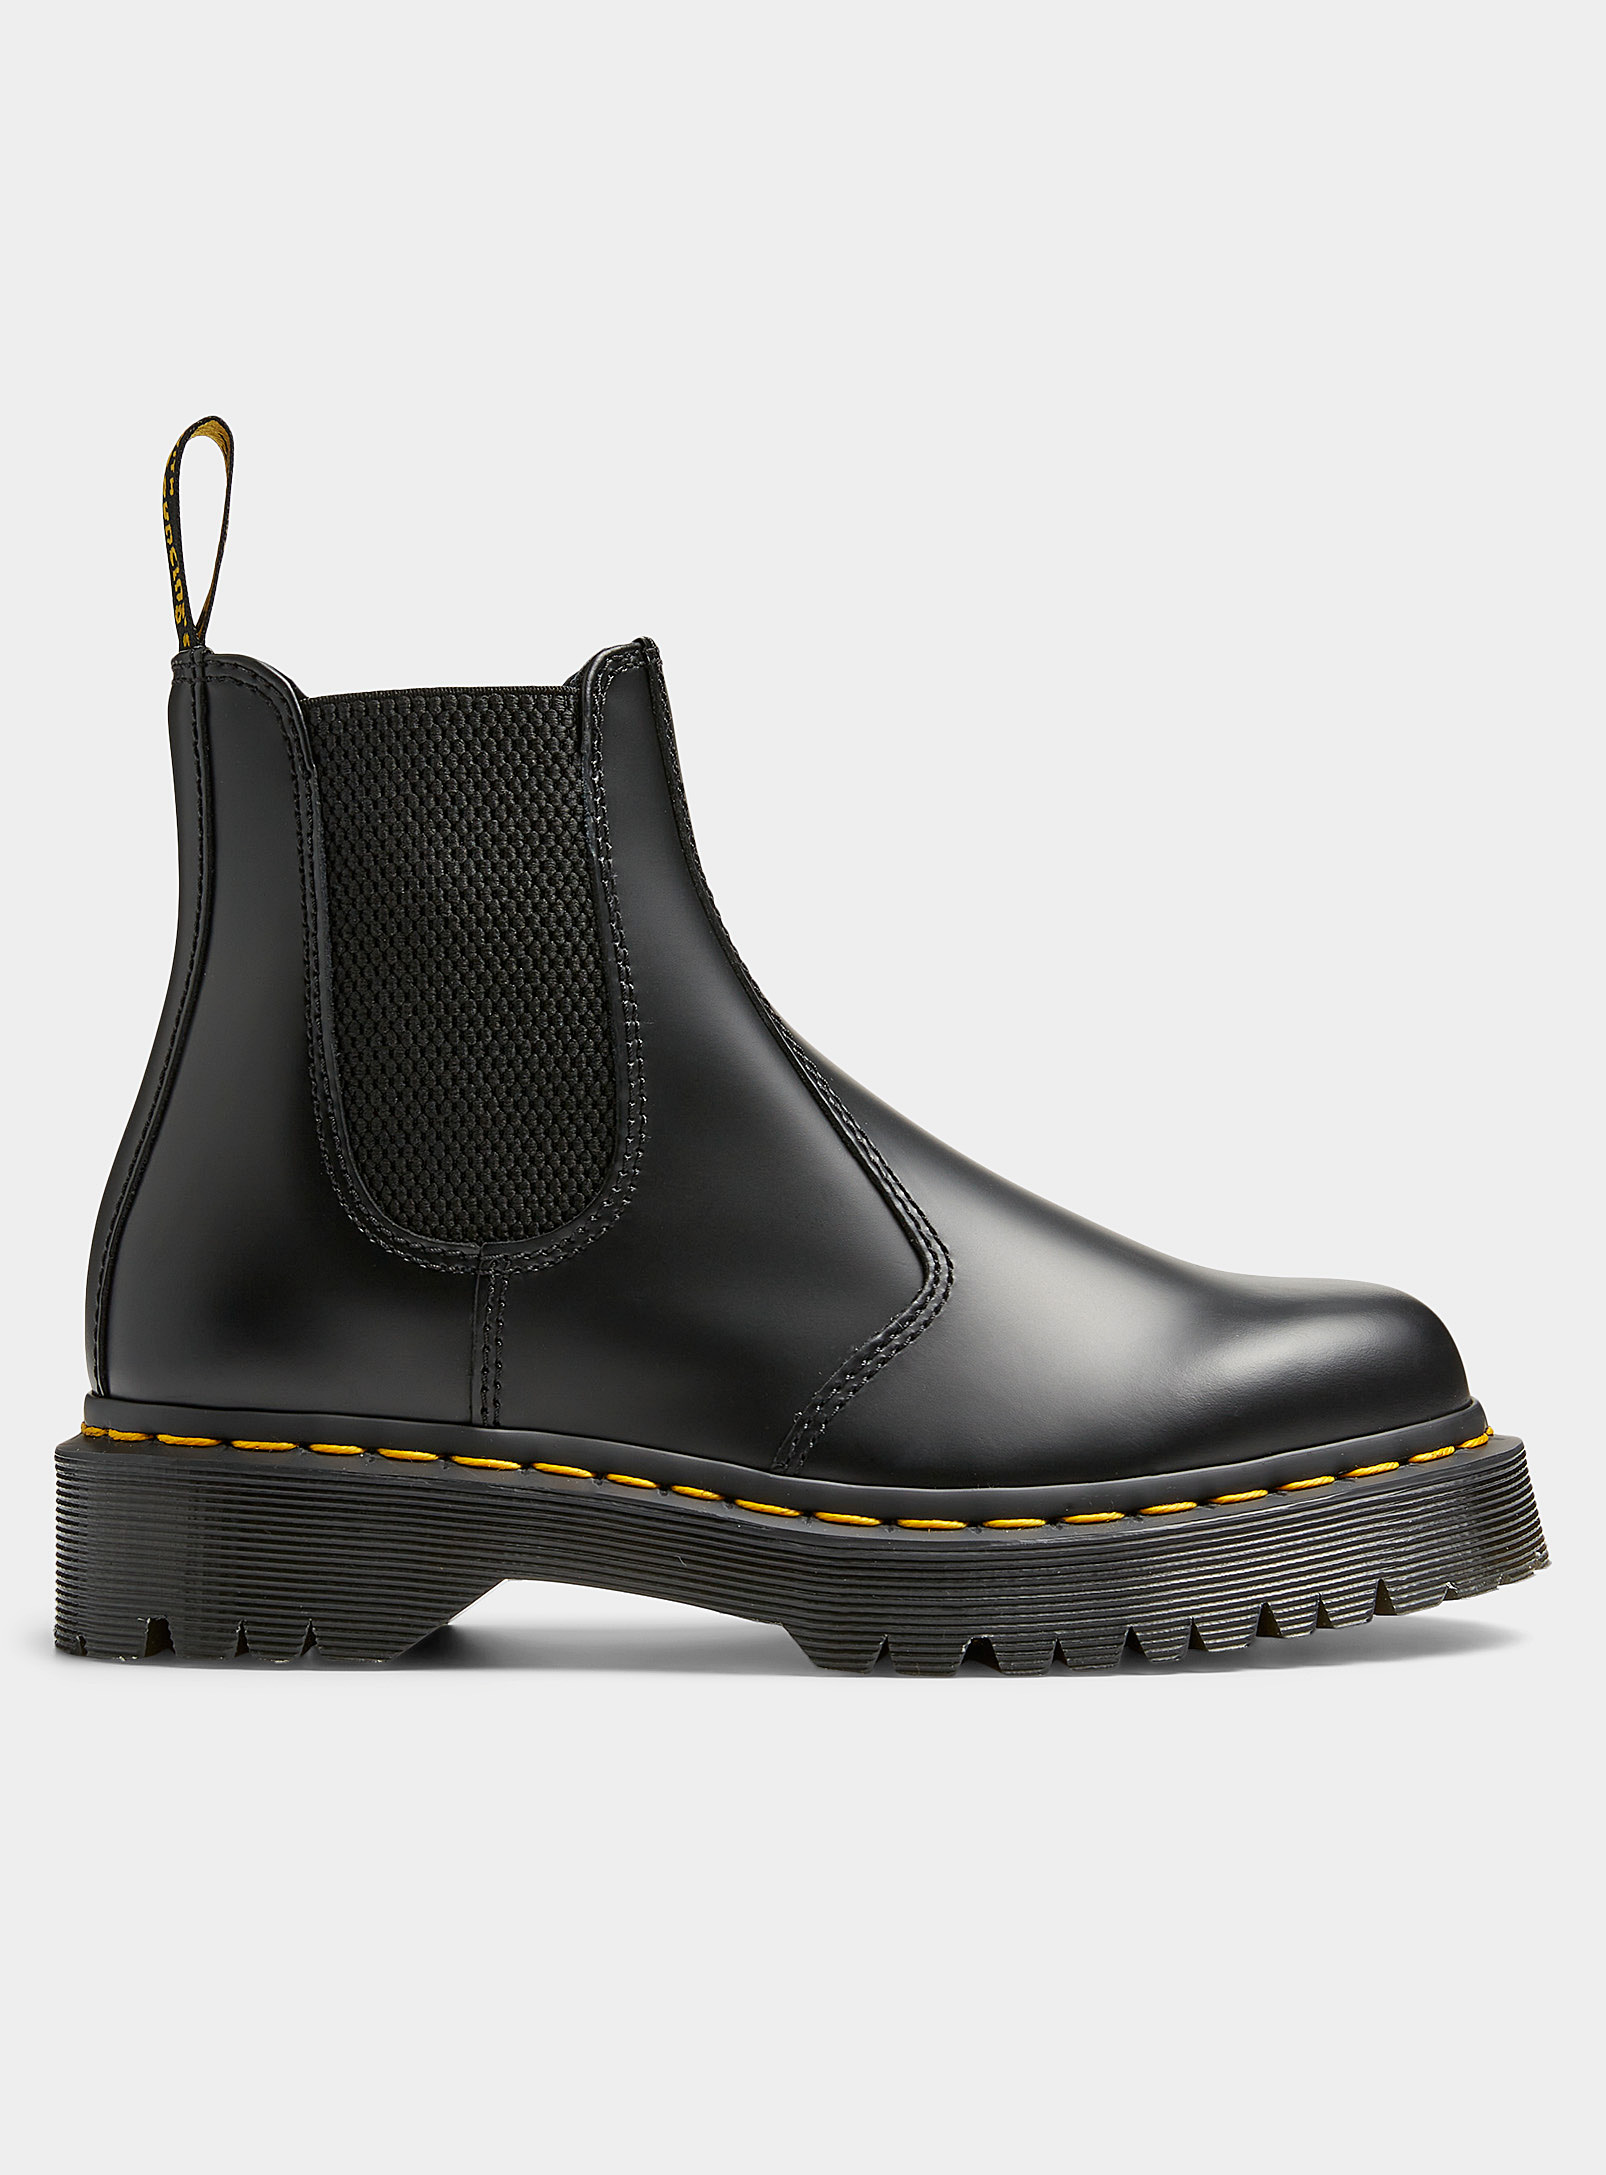 Dr. Martens - Women's Bex smooth leather Chelsea boots Women